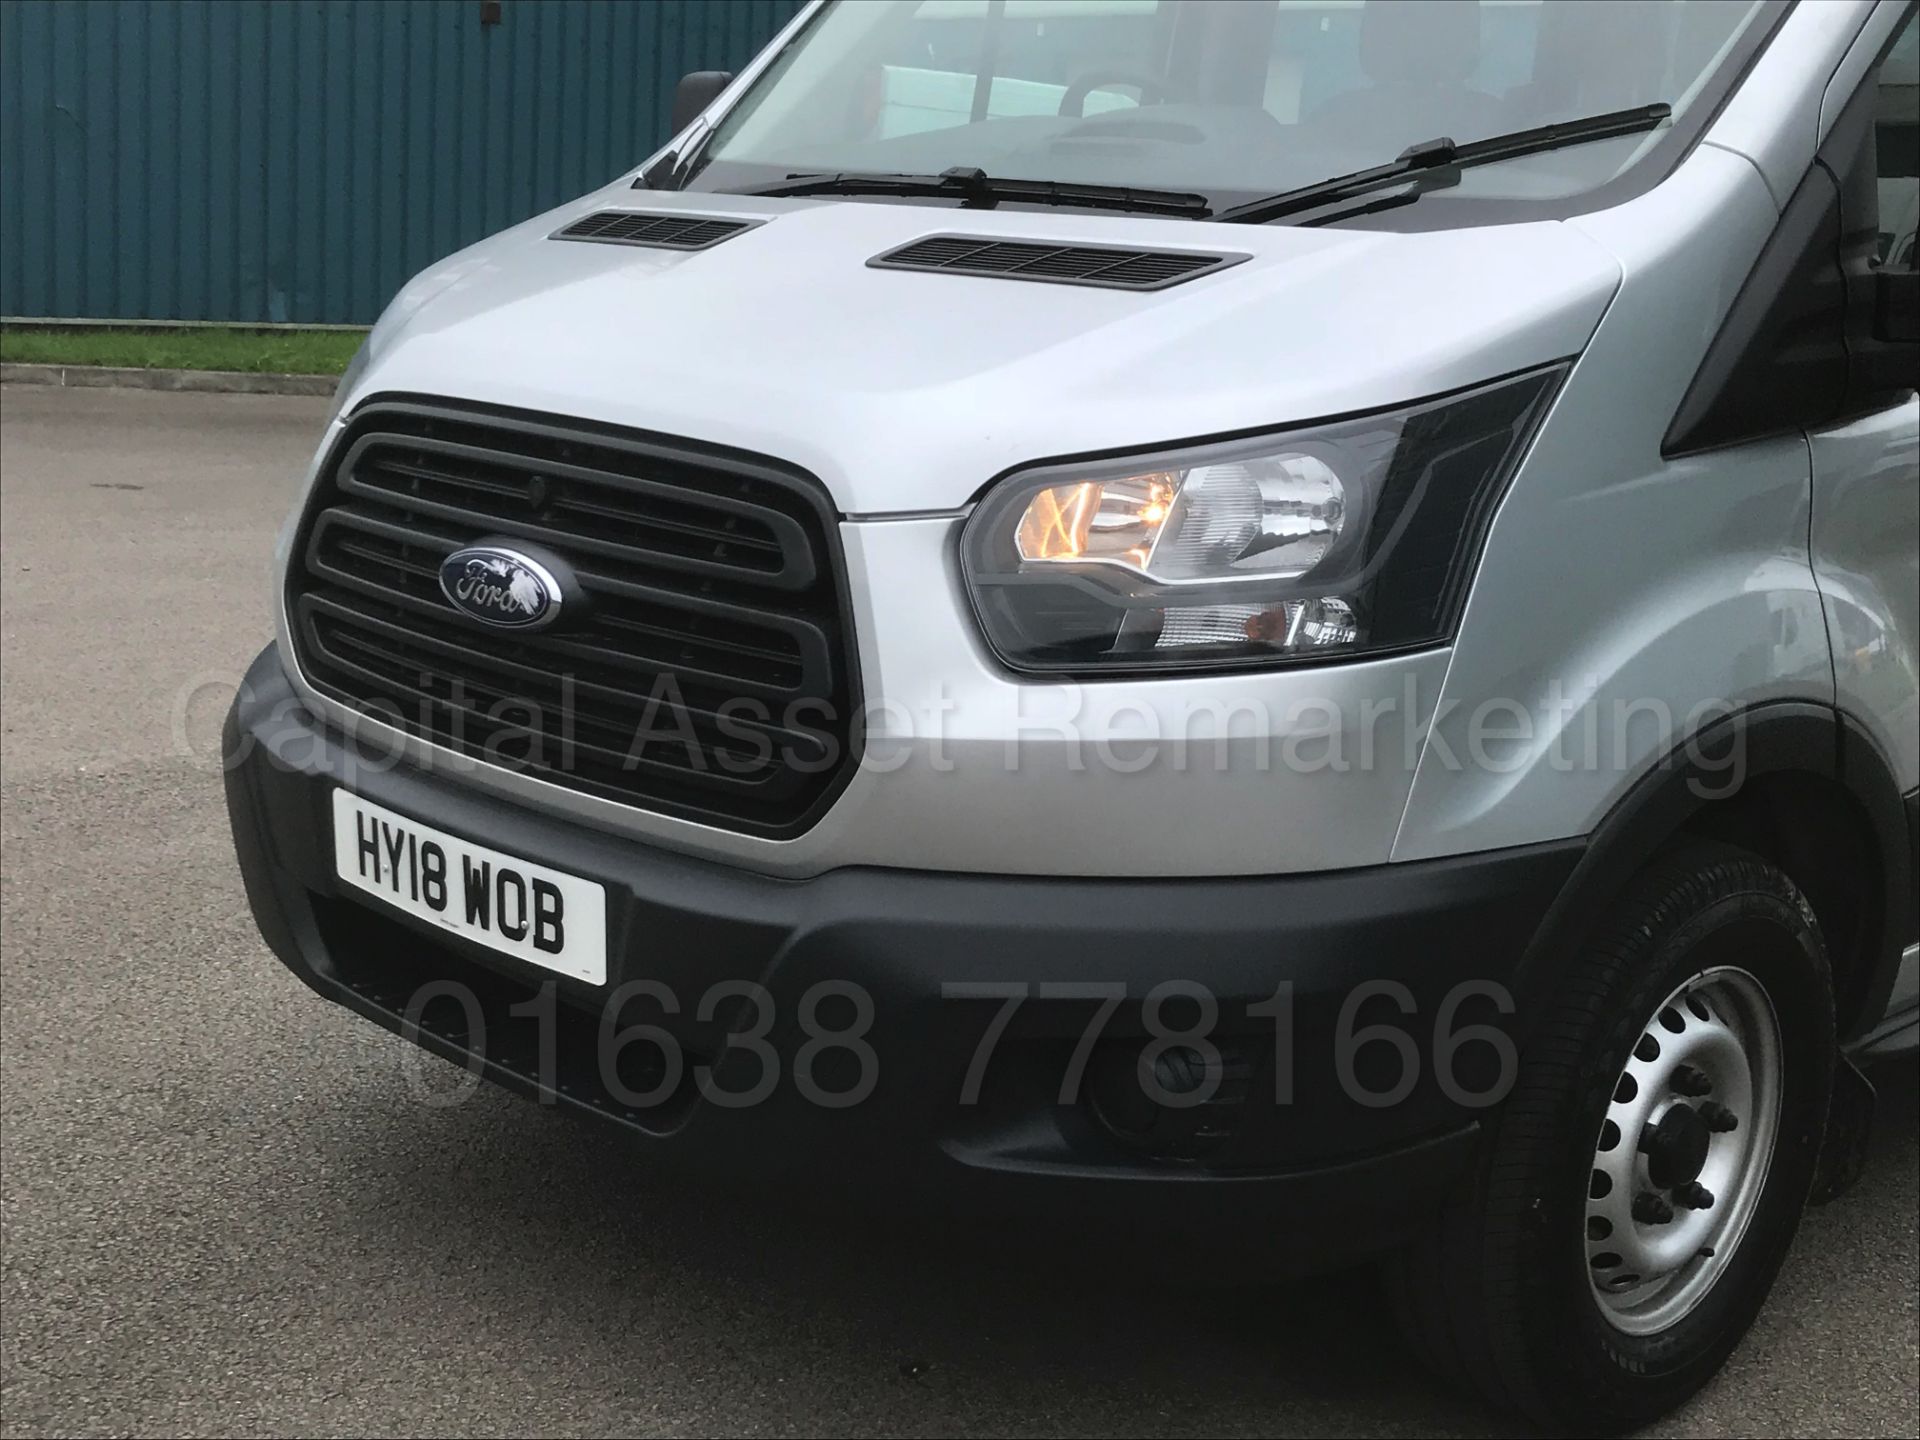 (On Sale) FORD TRANSIT LWB '15 SEATER MINI-BUS' (2018) '2.2 TDCI -125 BHP- 6 SPEED' 130 MILES ONLY ! - Image 20 of 50